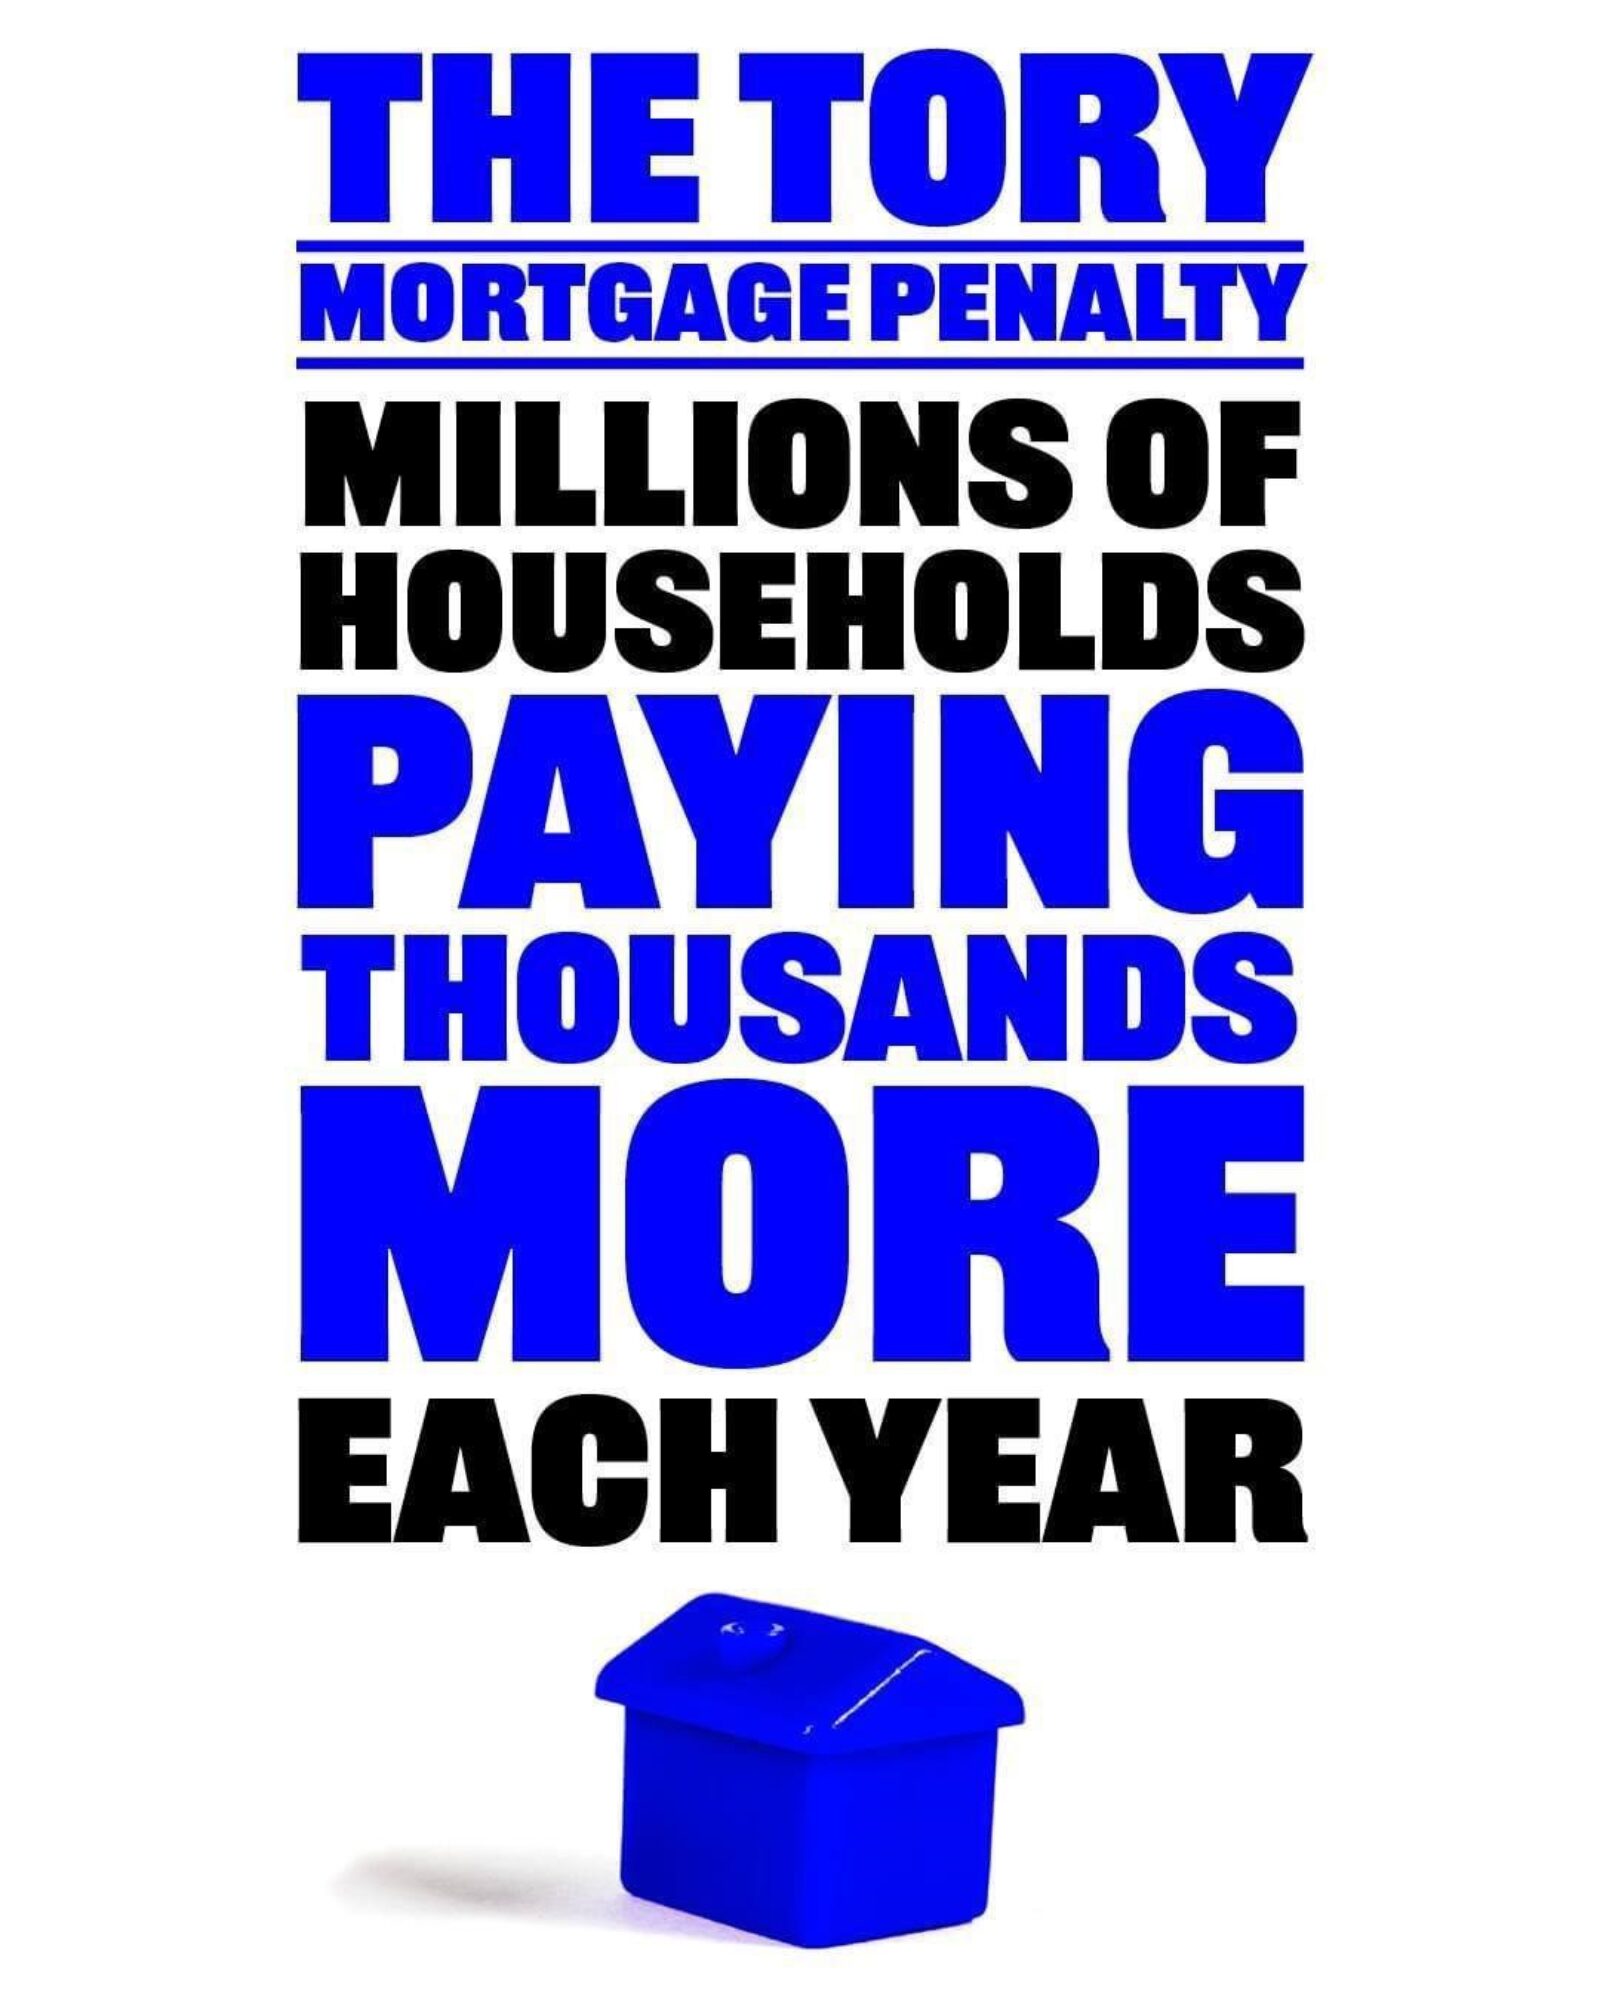 Infographic with image of house stating: "The Tory mortgage penalty: Millions of Households Paying Thousands More each year"